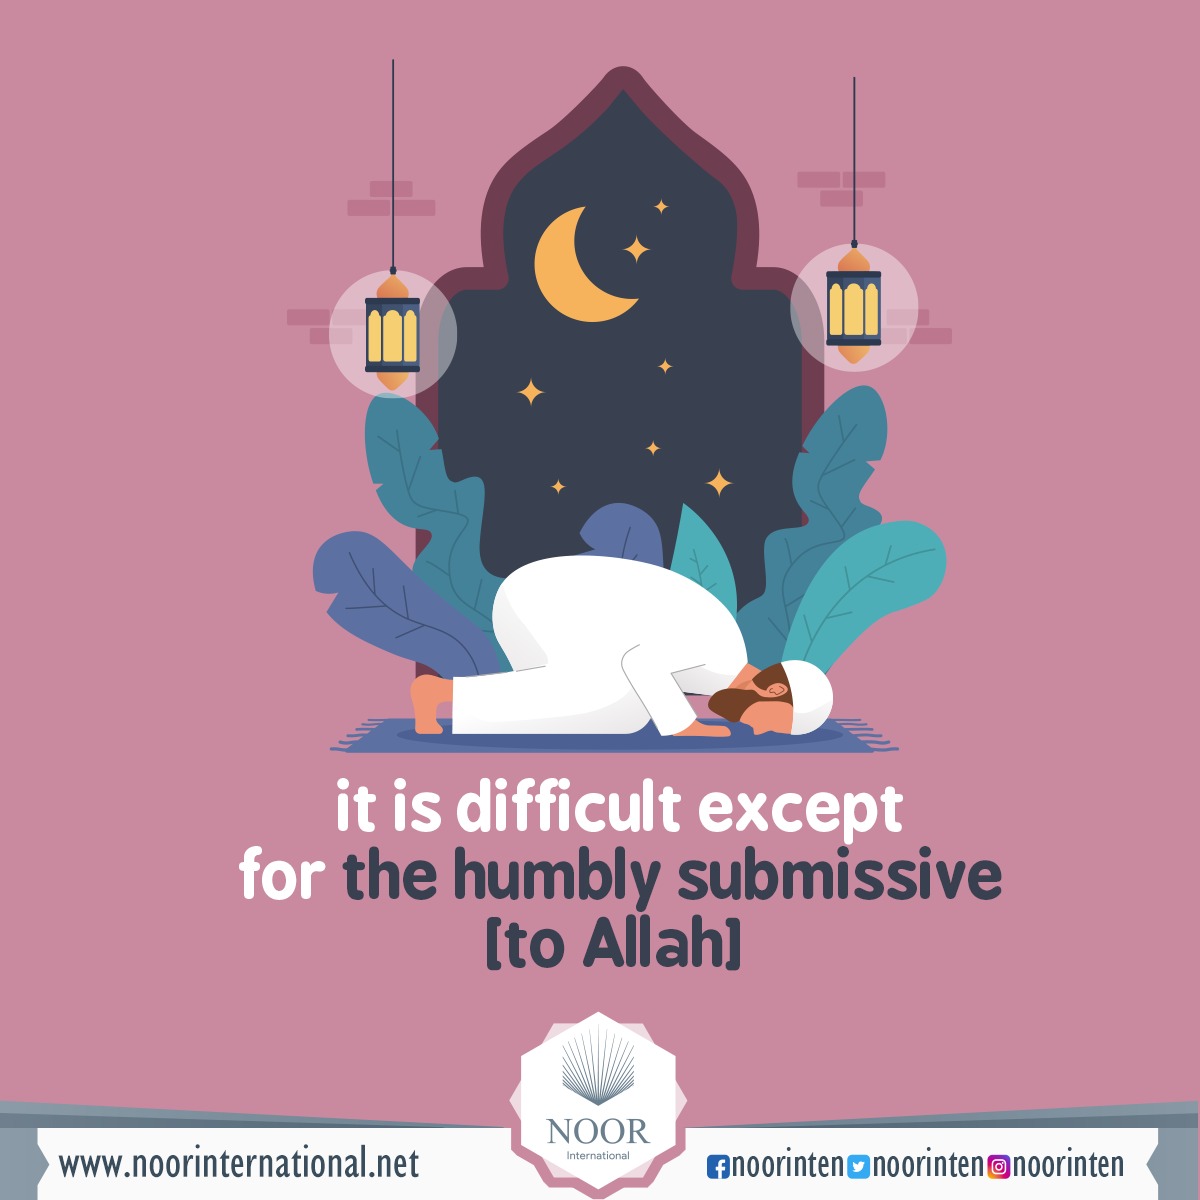 it is difficult except for the humbly submissive [to Allah]